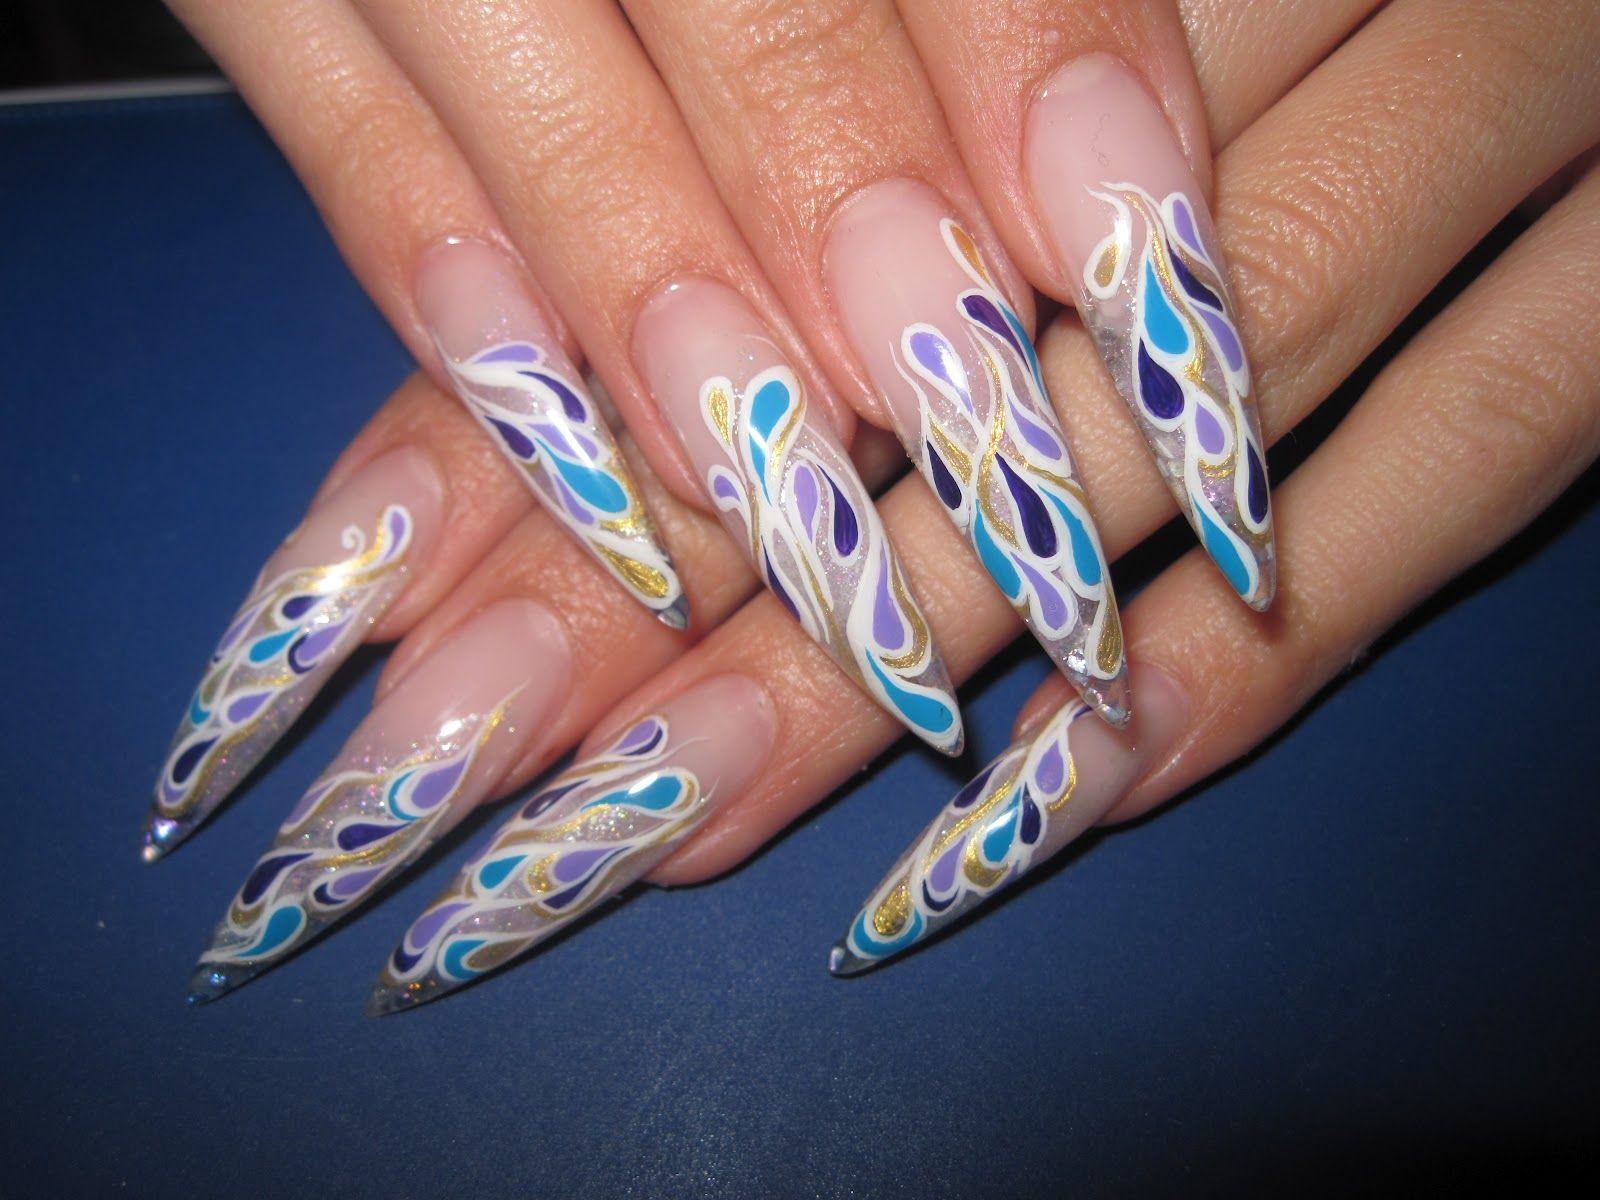 1. Latest Nail Art HD Picture Gallery - wide 9